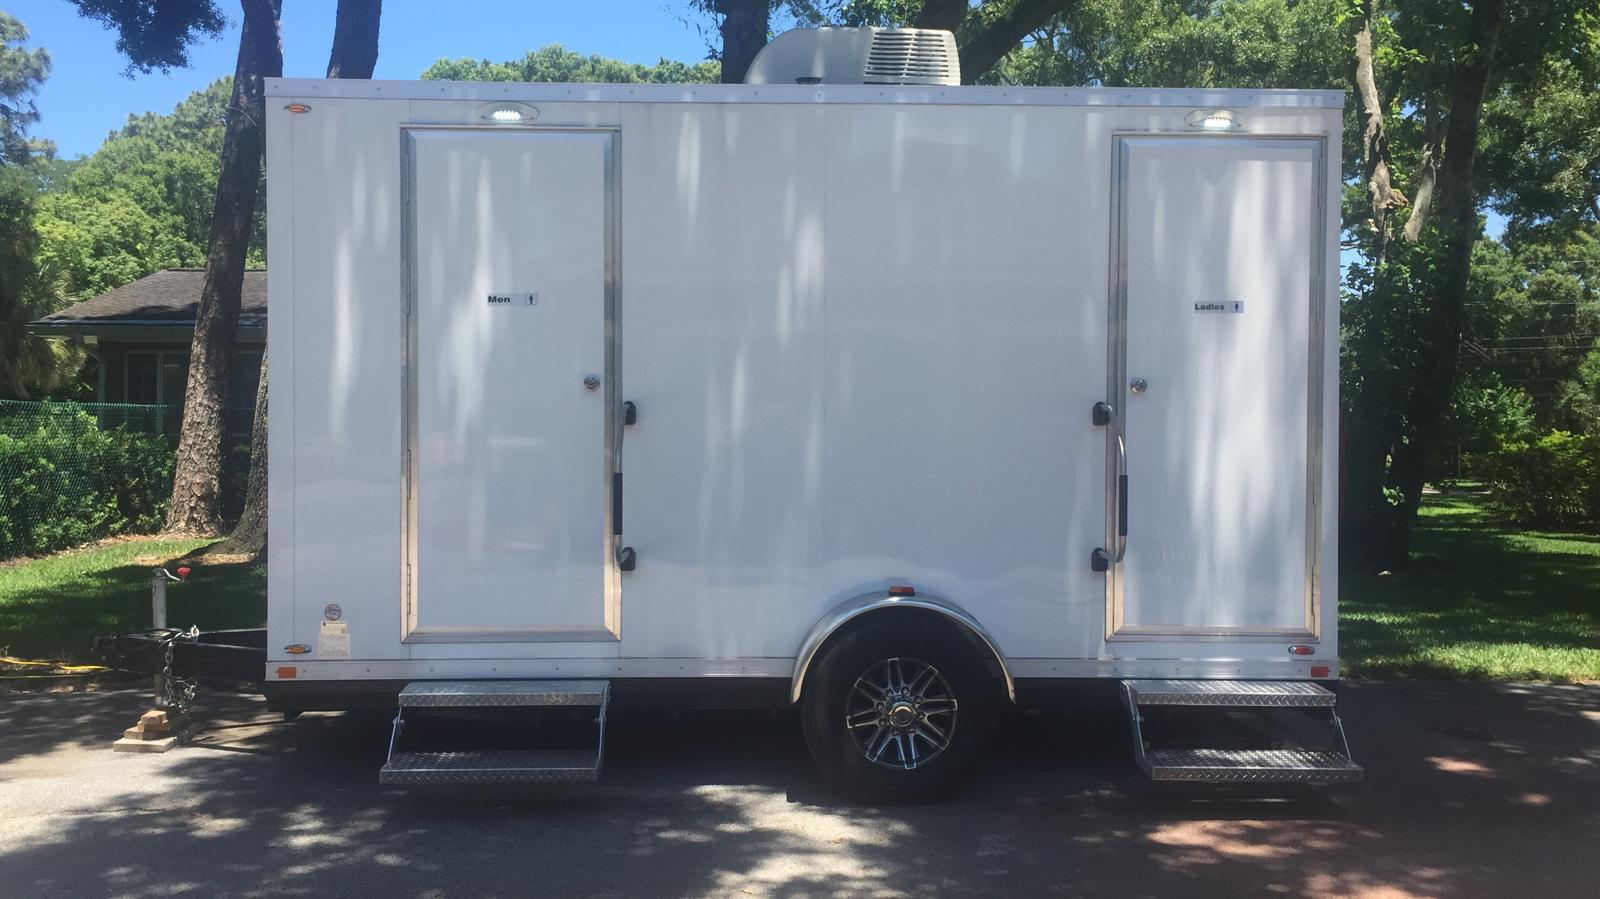 Elevate your event with PCS Rental's Luxury Restroom Trailer Rental in Tampa, FL. Experience convenience and style like never before. Contact us today!